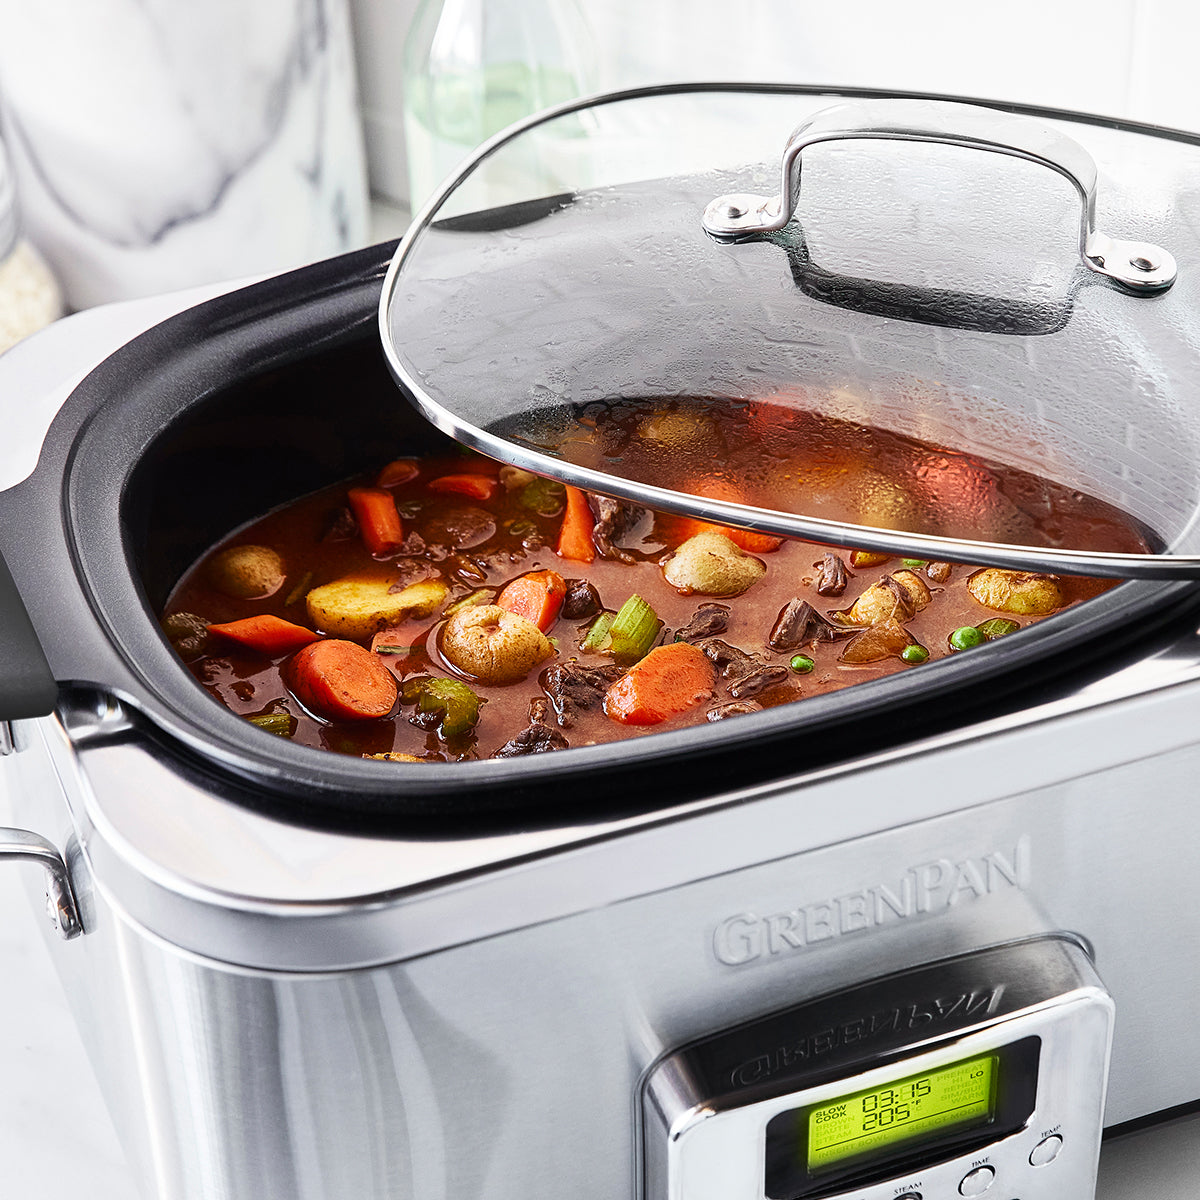 The Safest Non-Toxic Slow Cookers